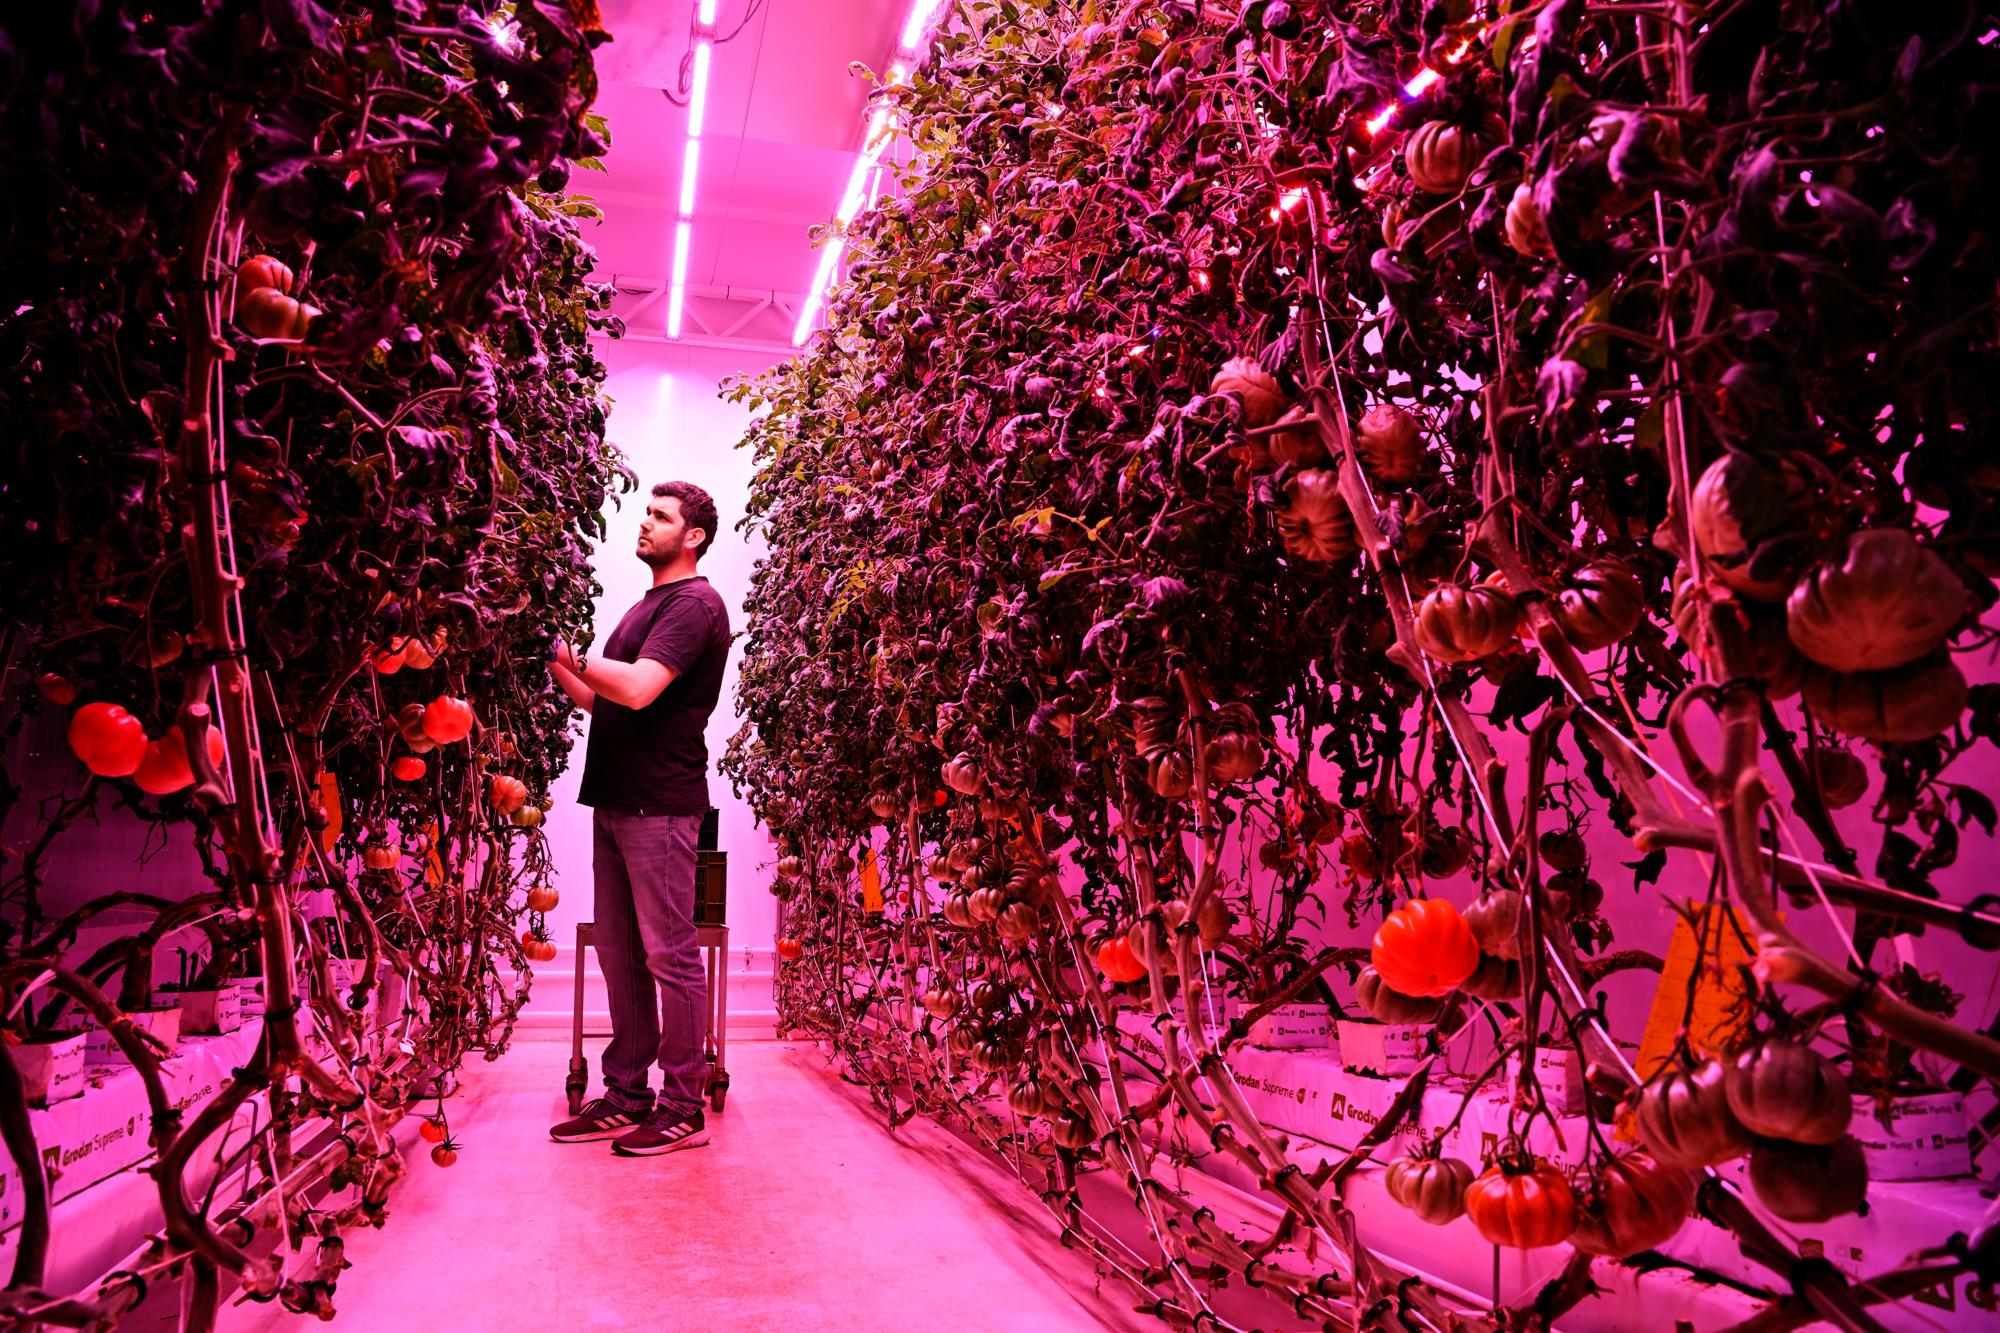 GrowWise uses vertical farming to grow tomatoes